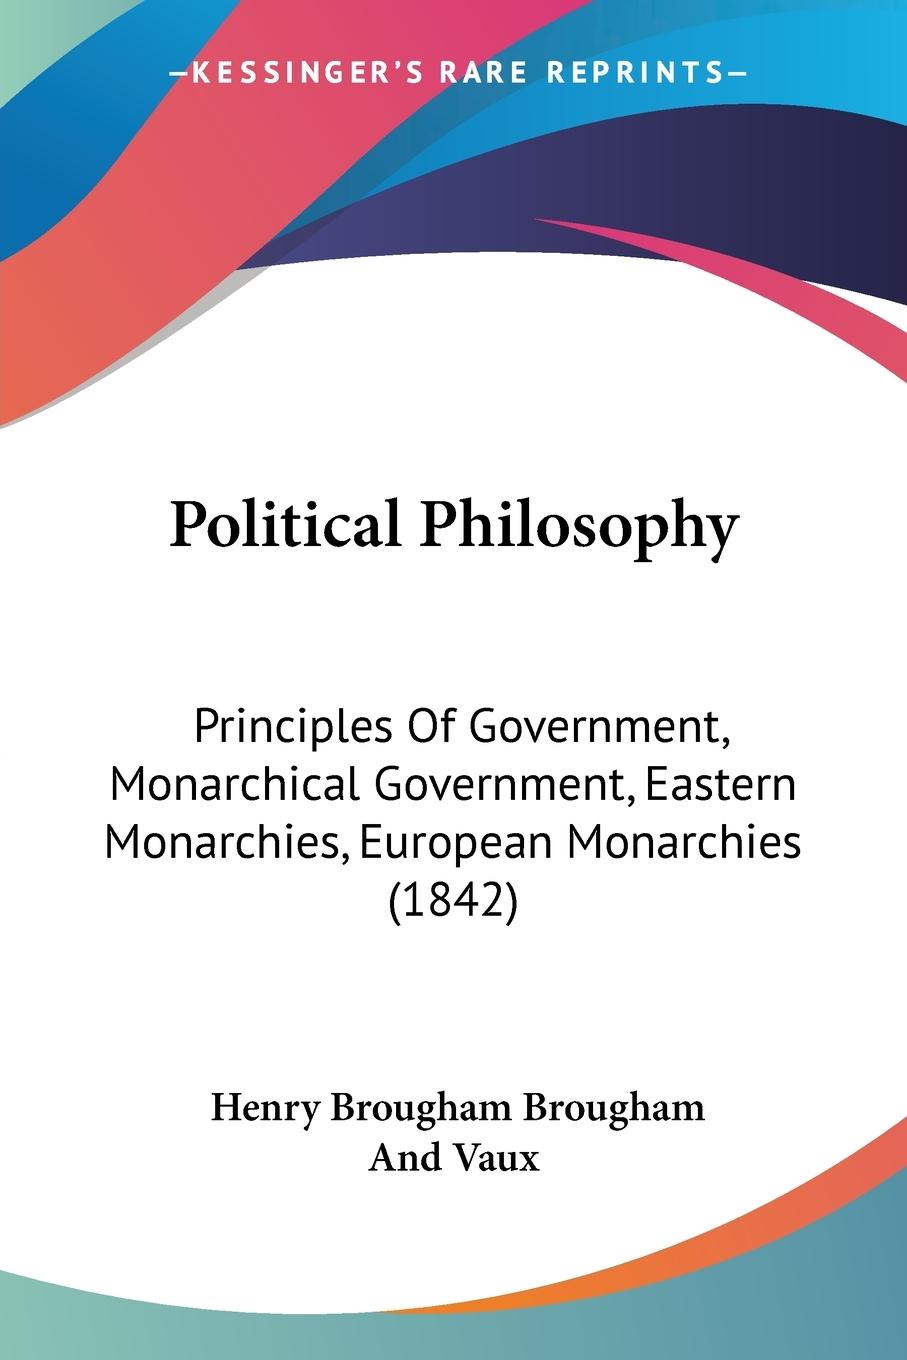 Political Philosophy - Vaux, Henry Brougham Brougham And